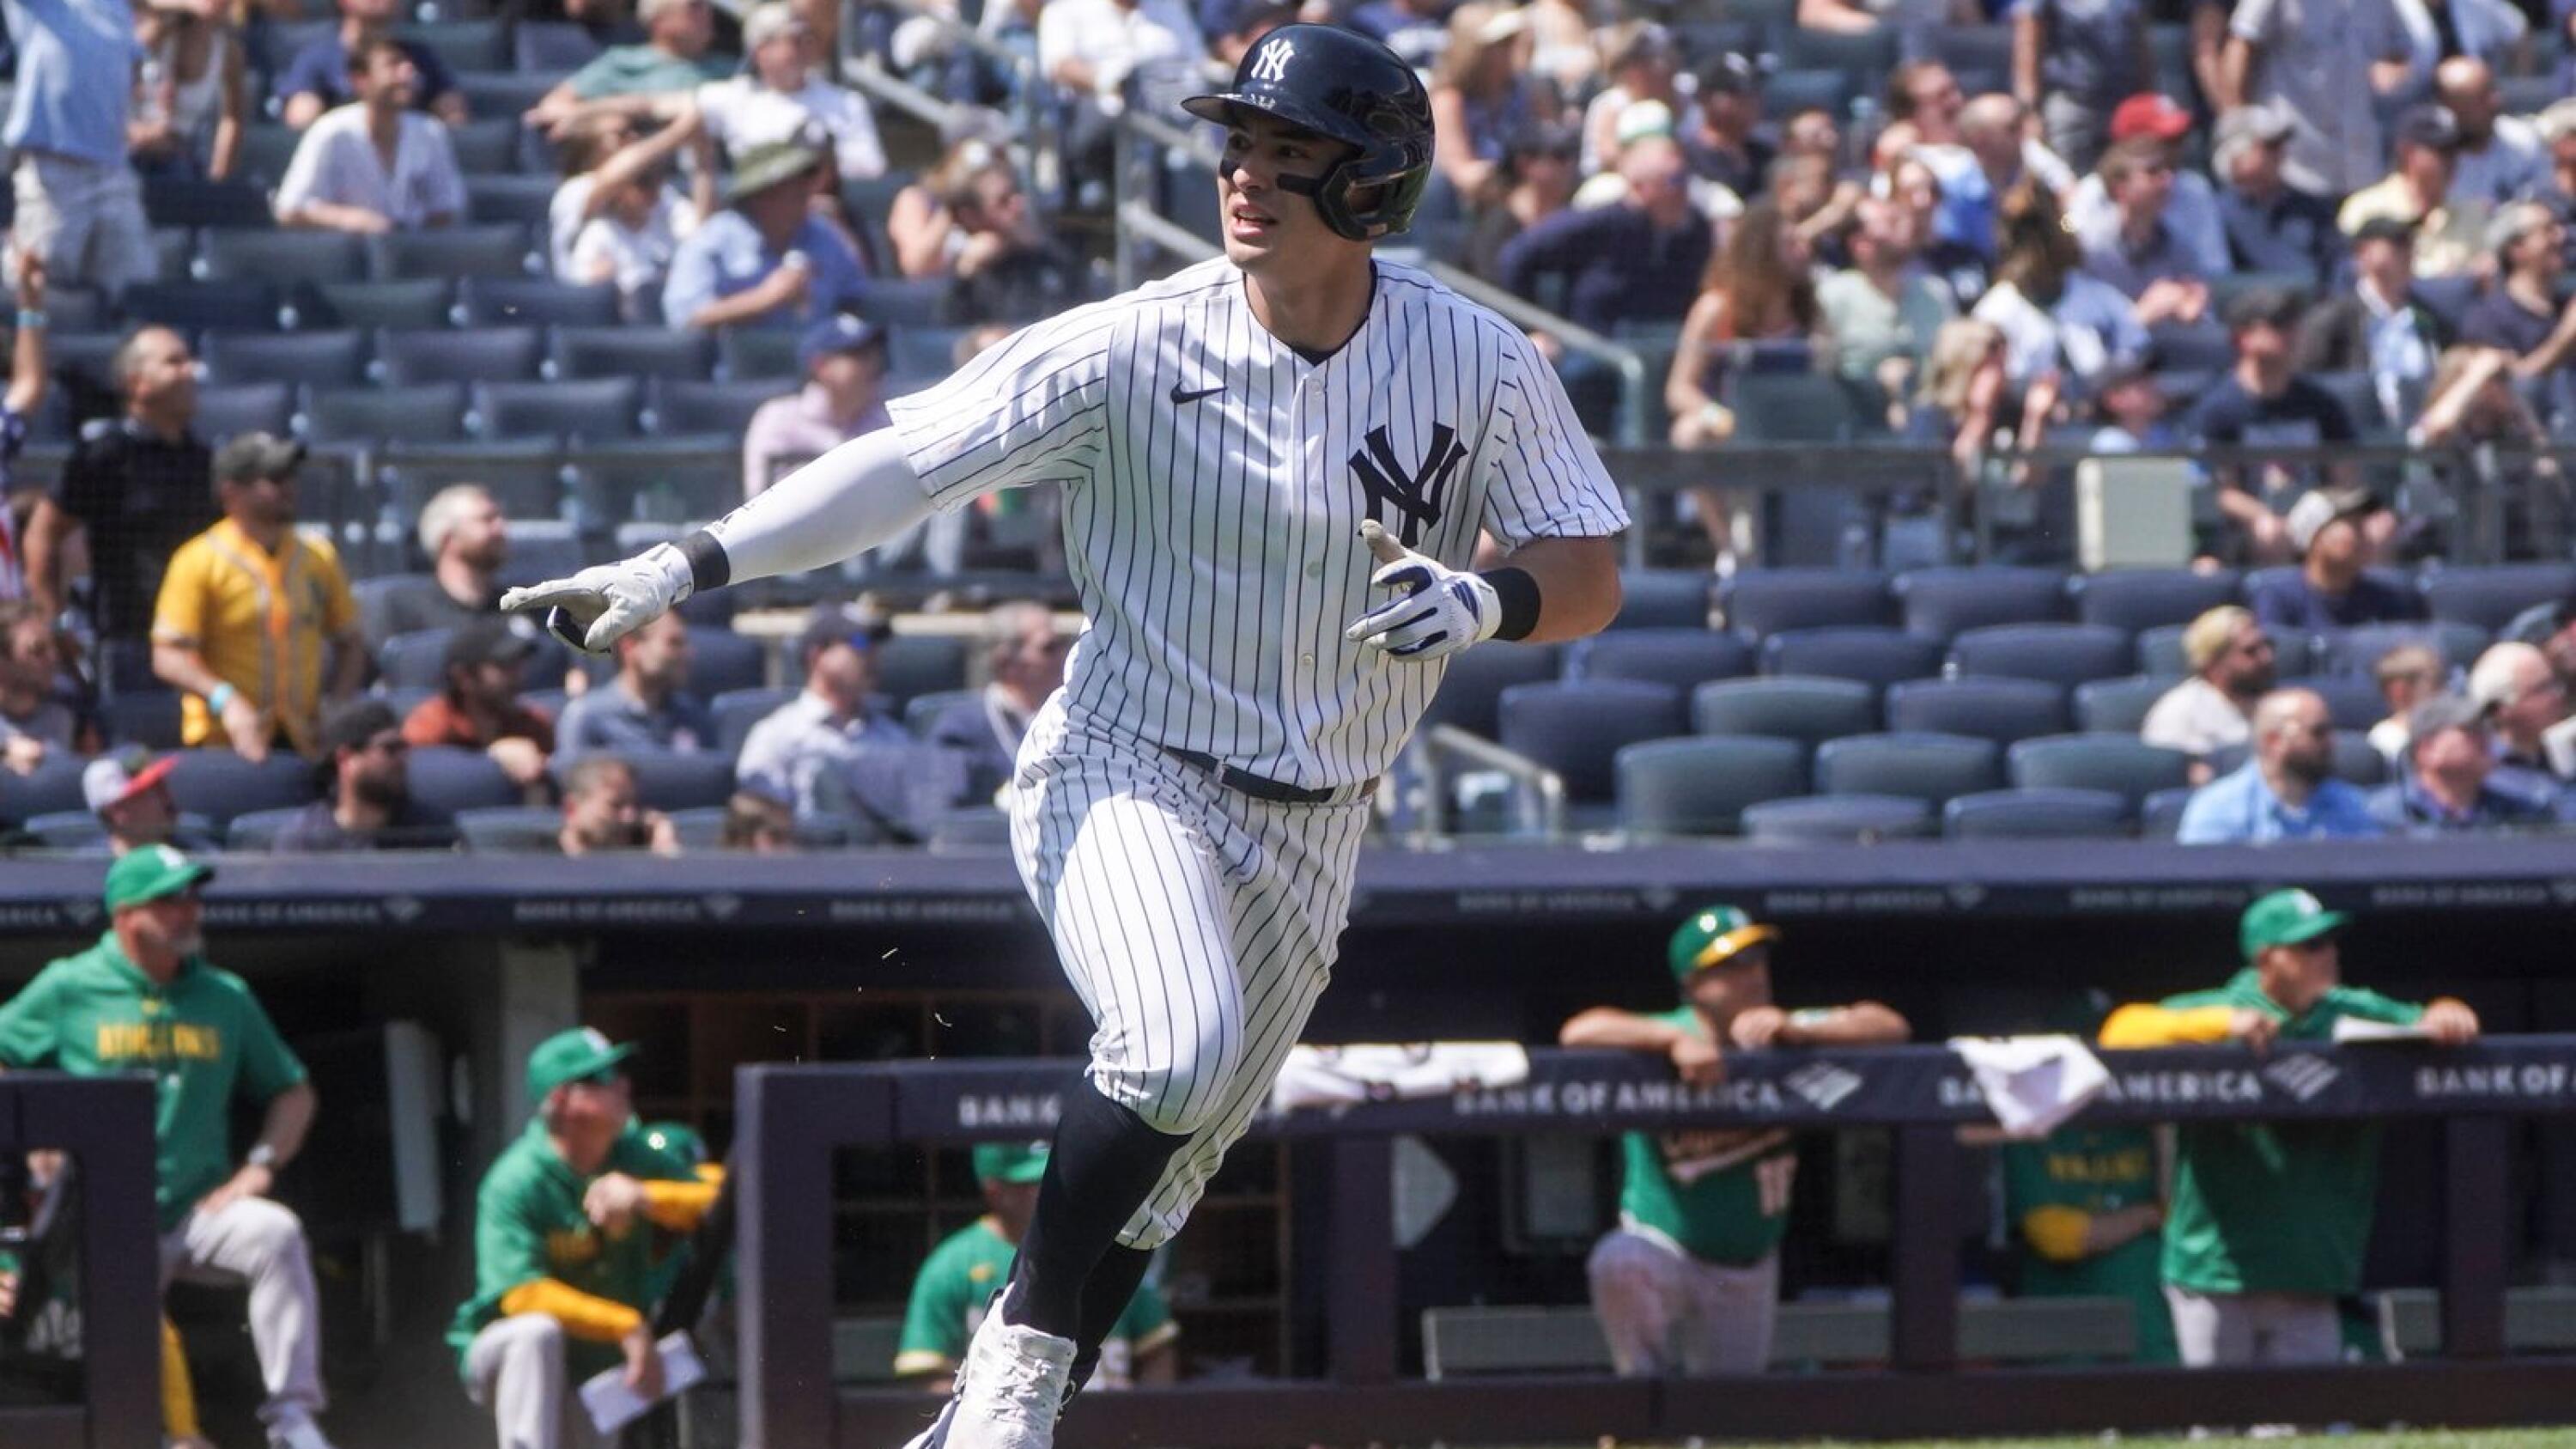 A's shut down Yankees' bats for 2nd straight game in 4-1 win